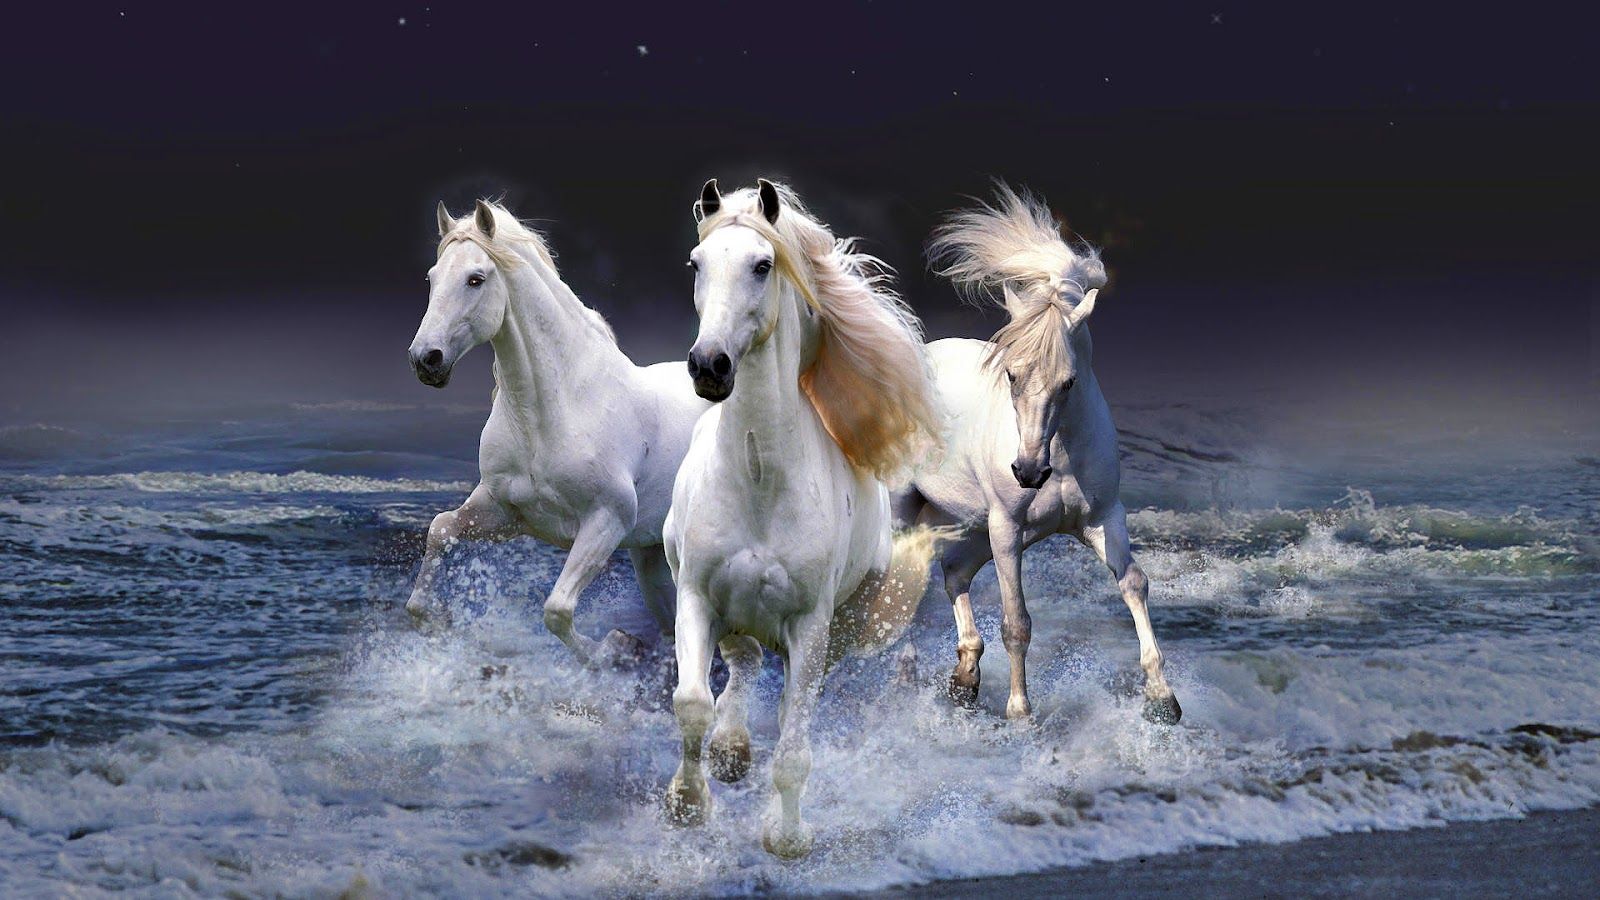 Animated Horse Background Horses Running Through Water Or